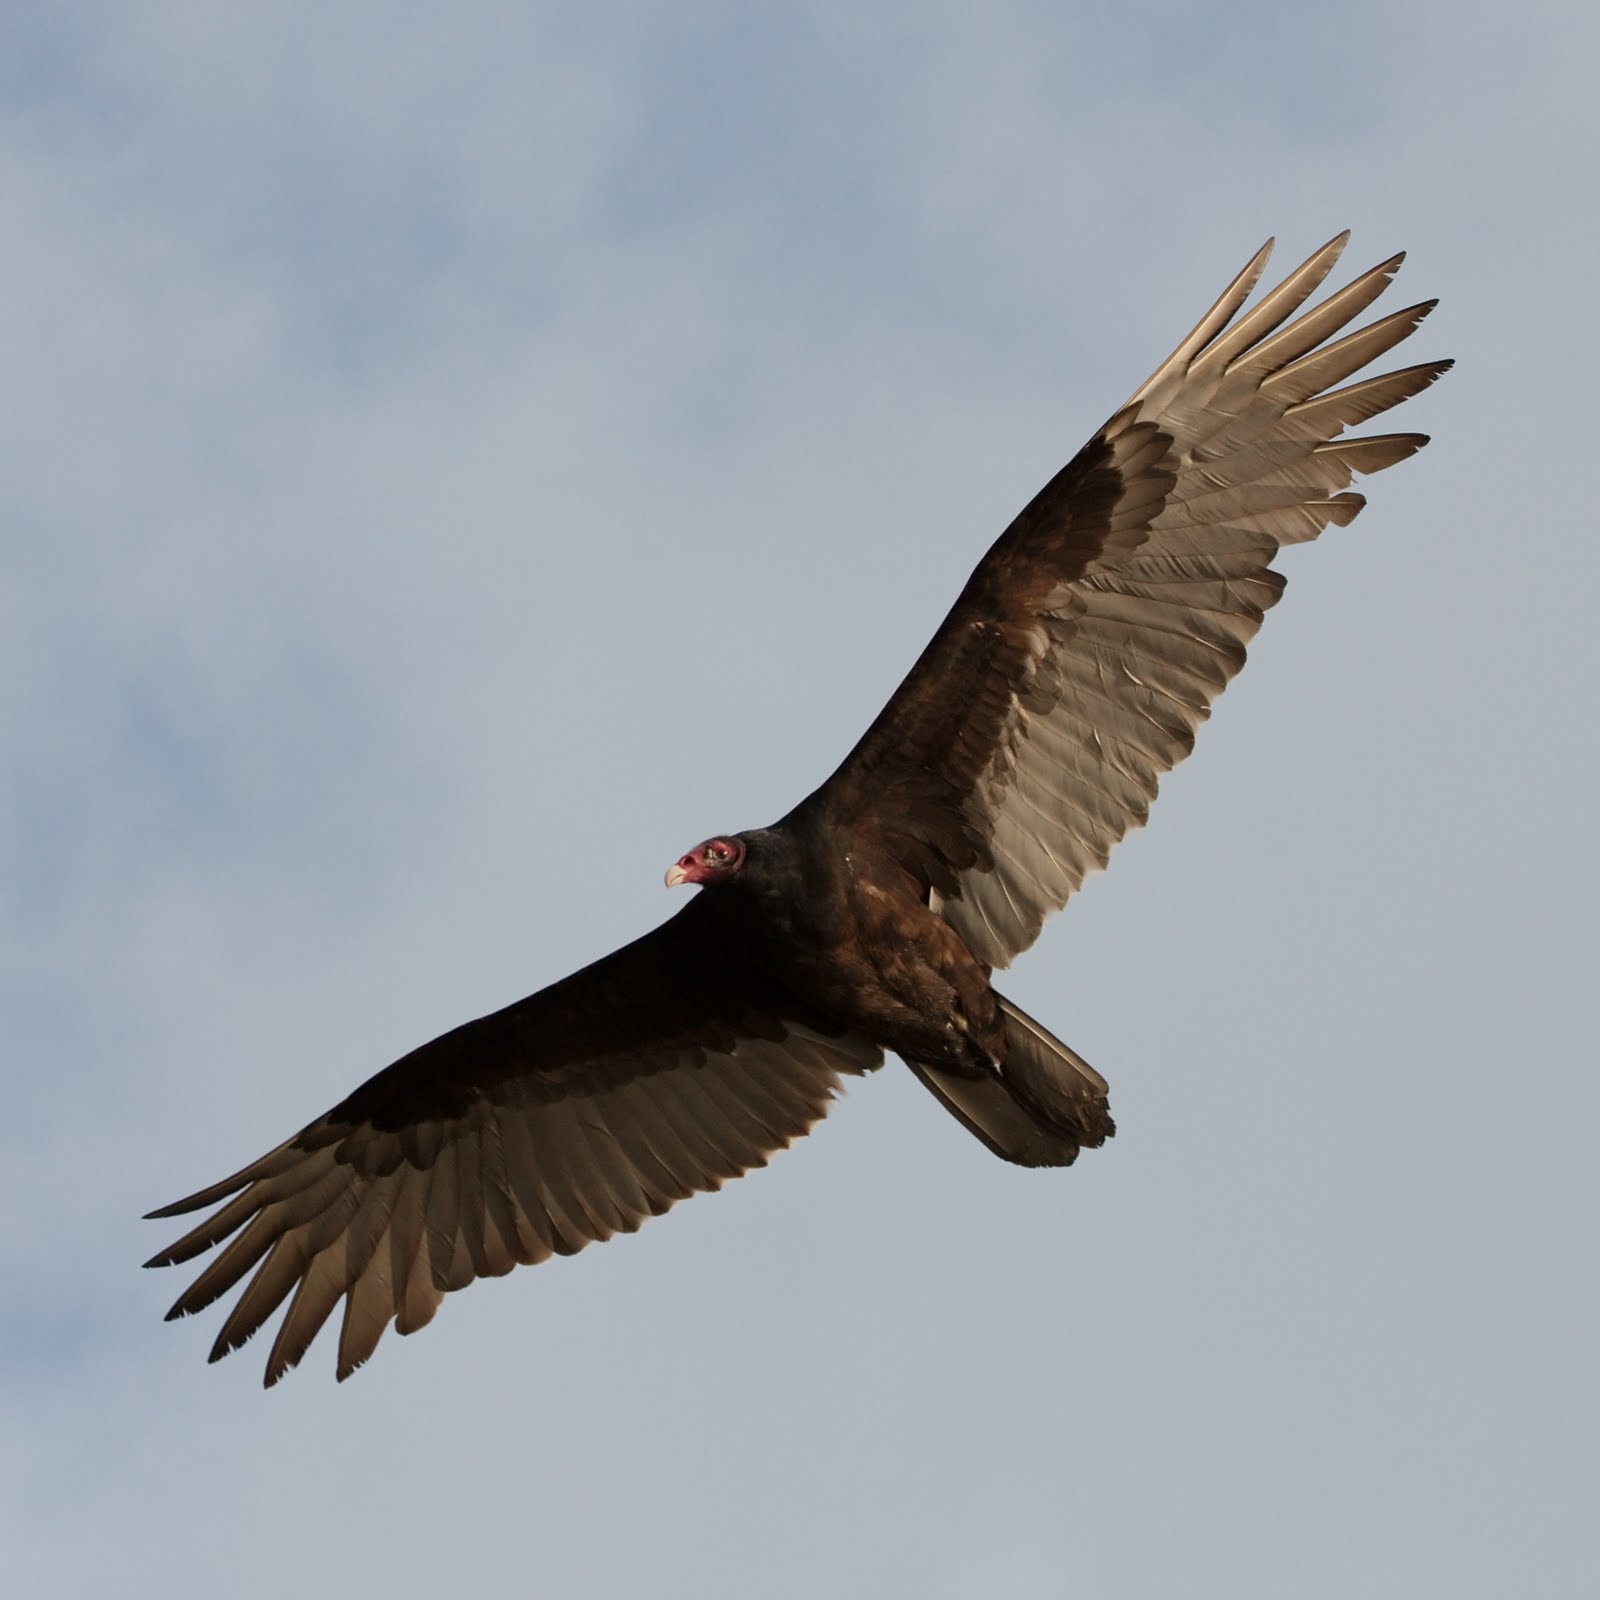 The Turkey Vulture: A Welcome Invasive Species? - - The Adirondack ...